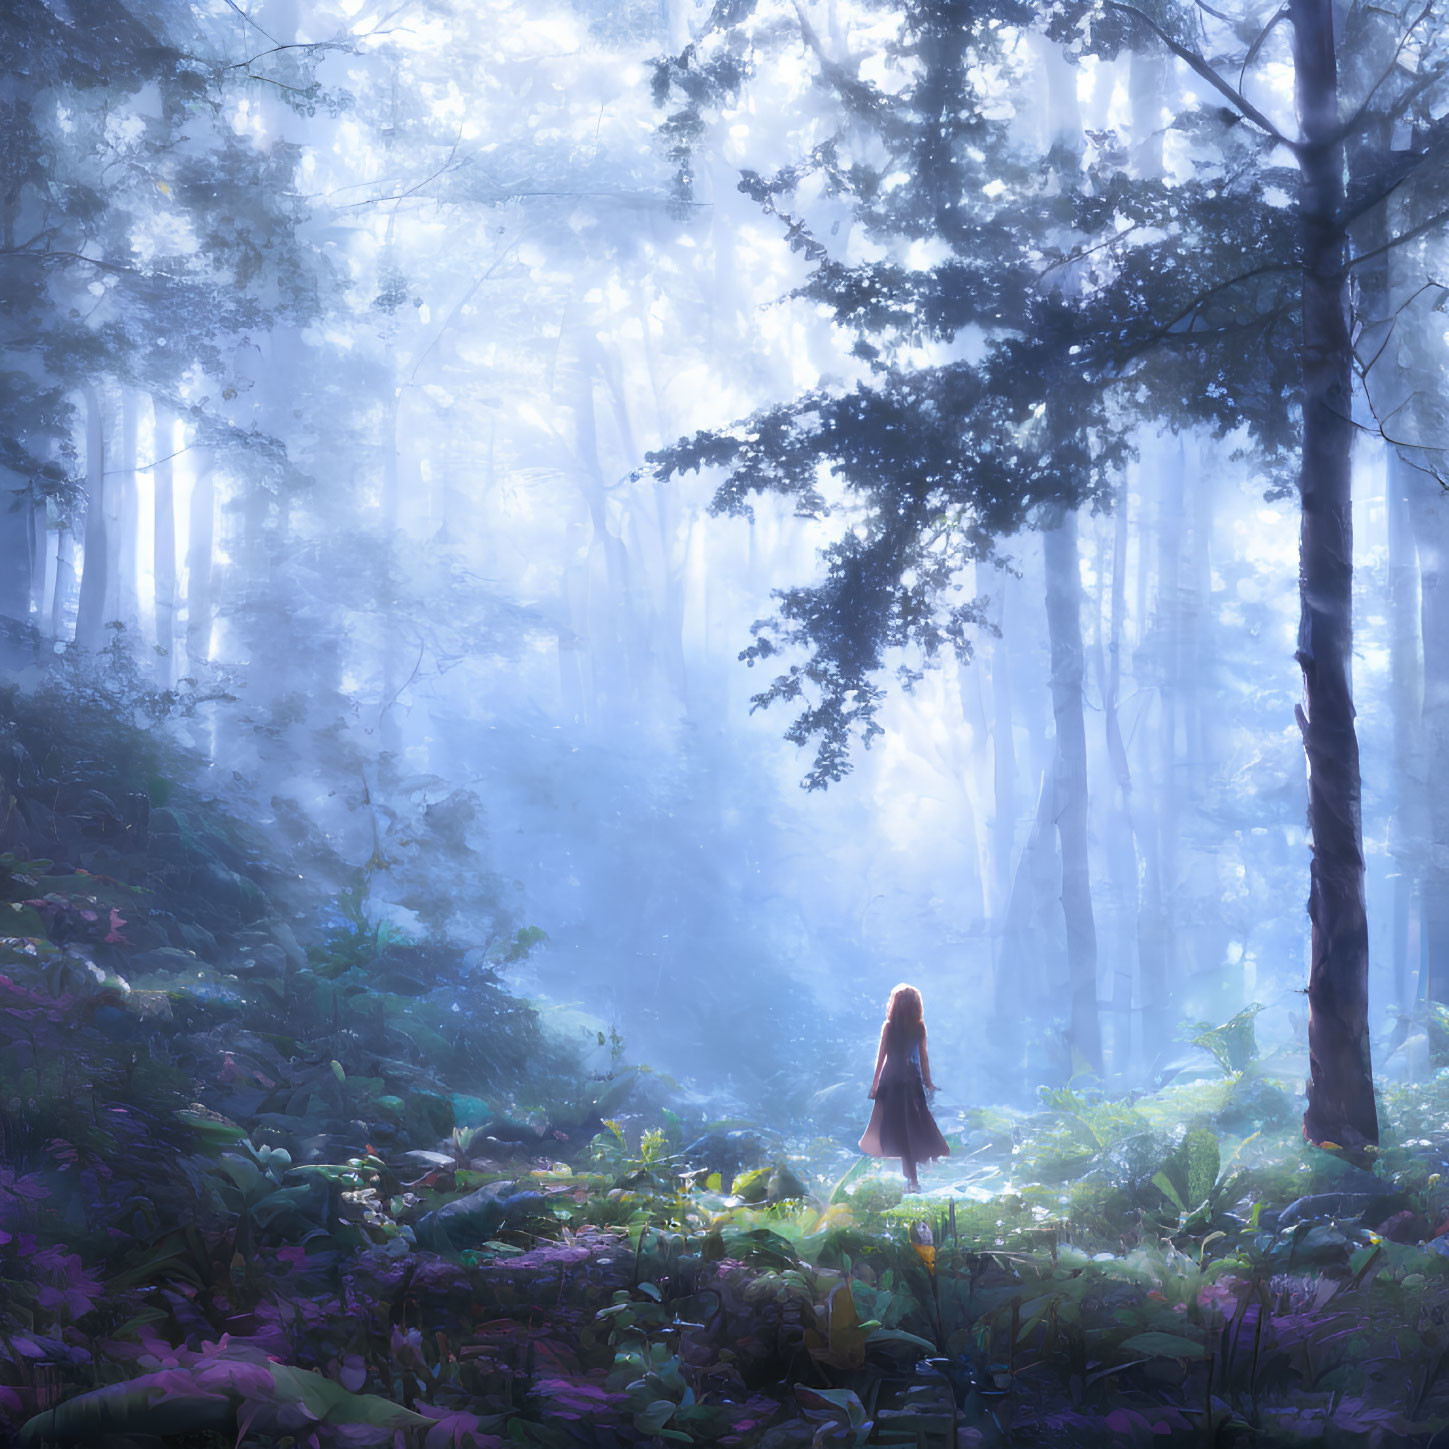 Mystical forest scene with person in sunlight and lush foliage